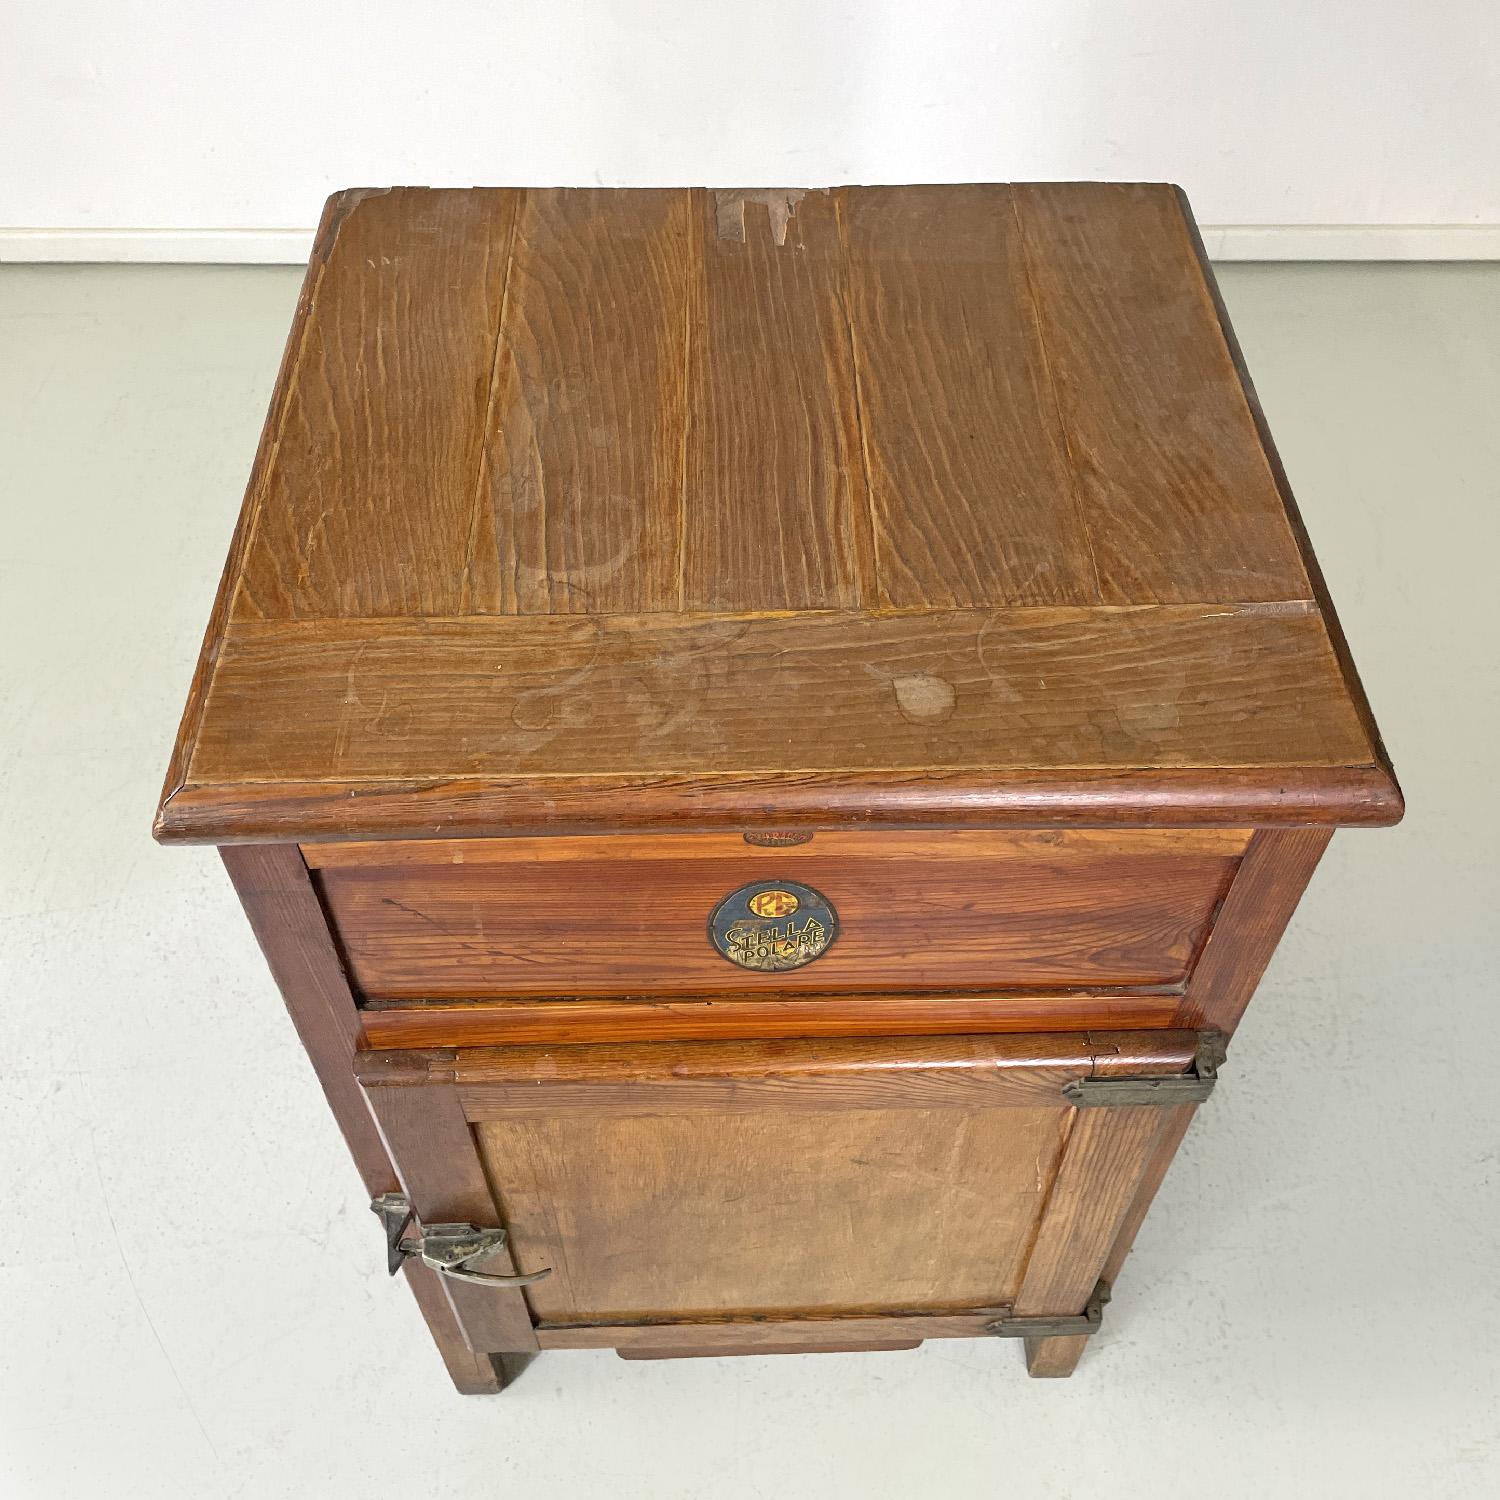 Italian wooden icebox Stella Polare by G. Saracco Asti, early 1900s For Sale 3